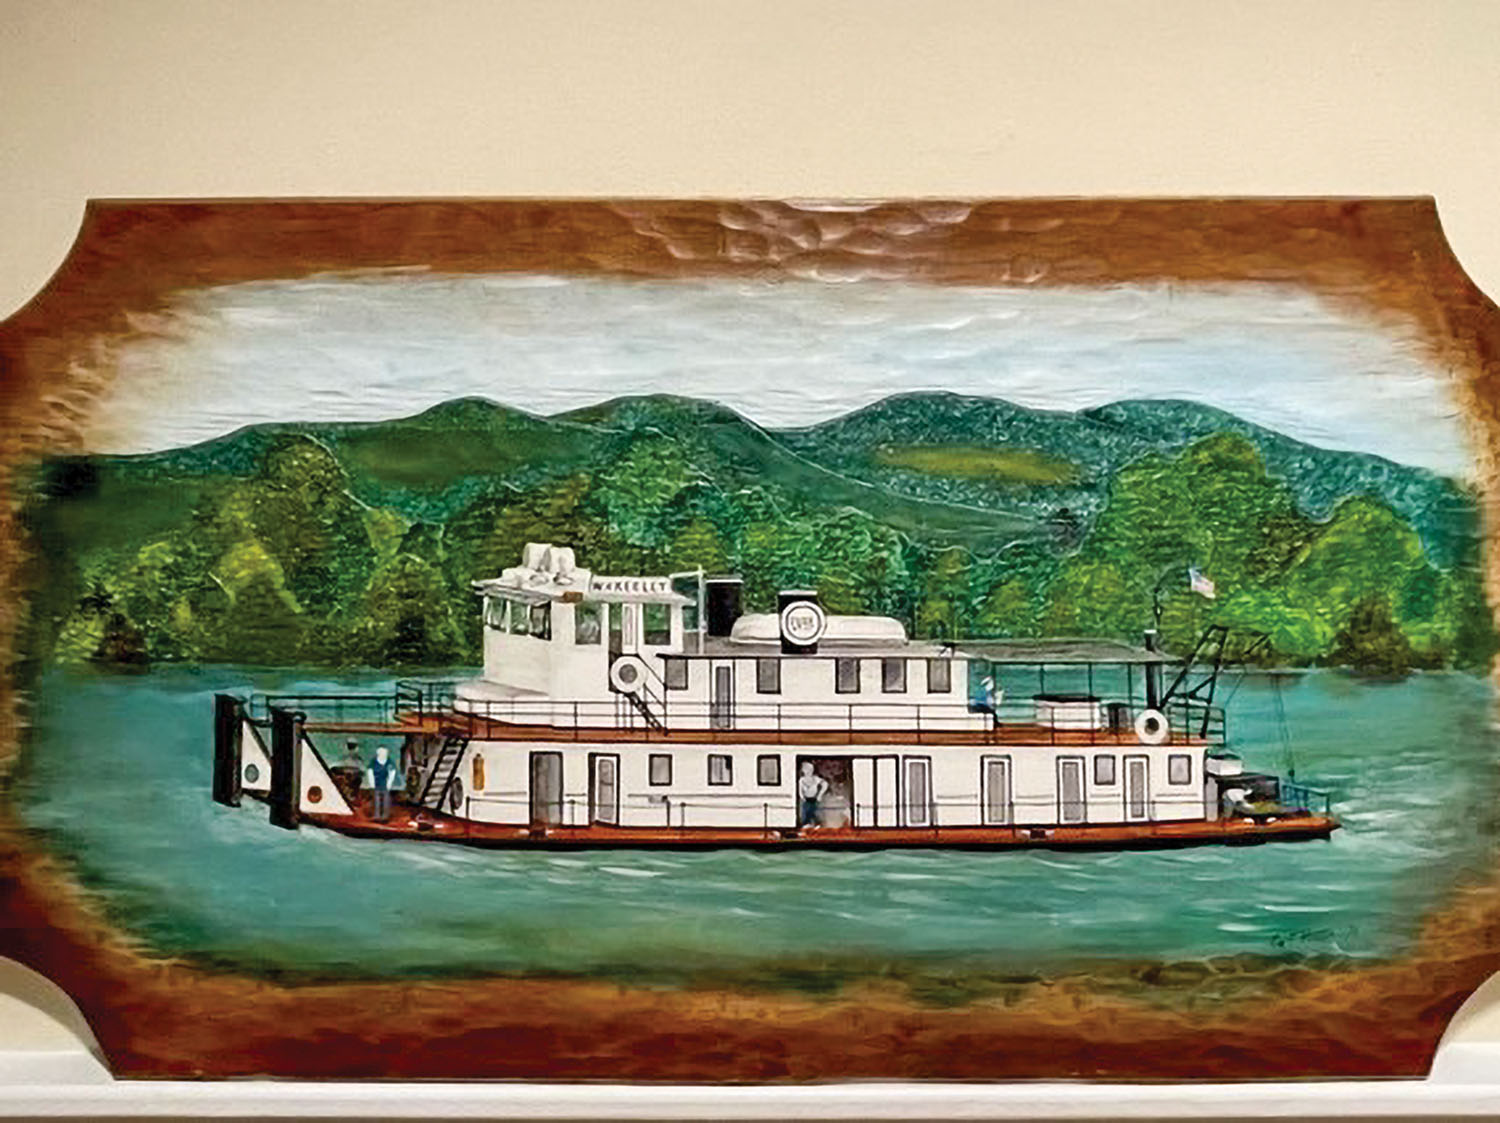 Painting of the W.V. Keeley by Mike Hager’s father. (Courtesy Mike Hager)